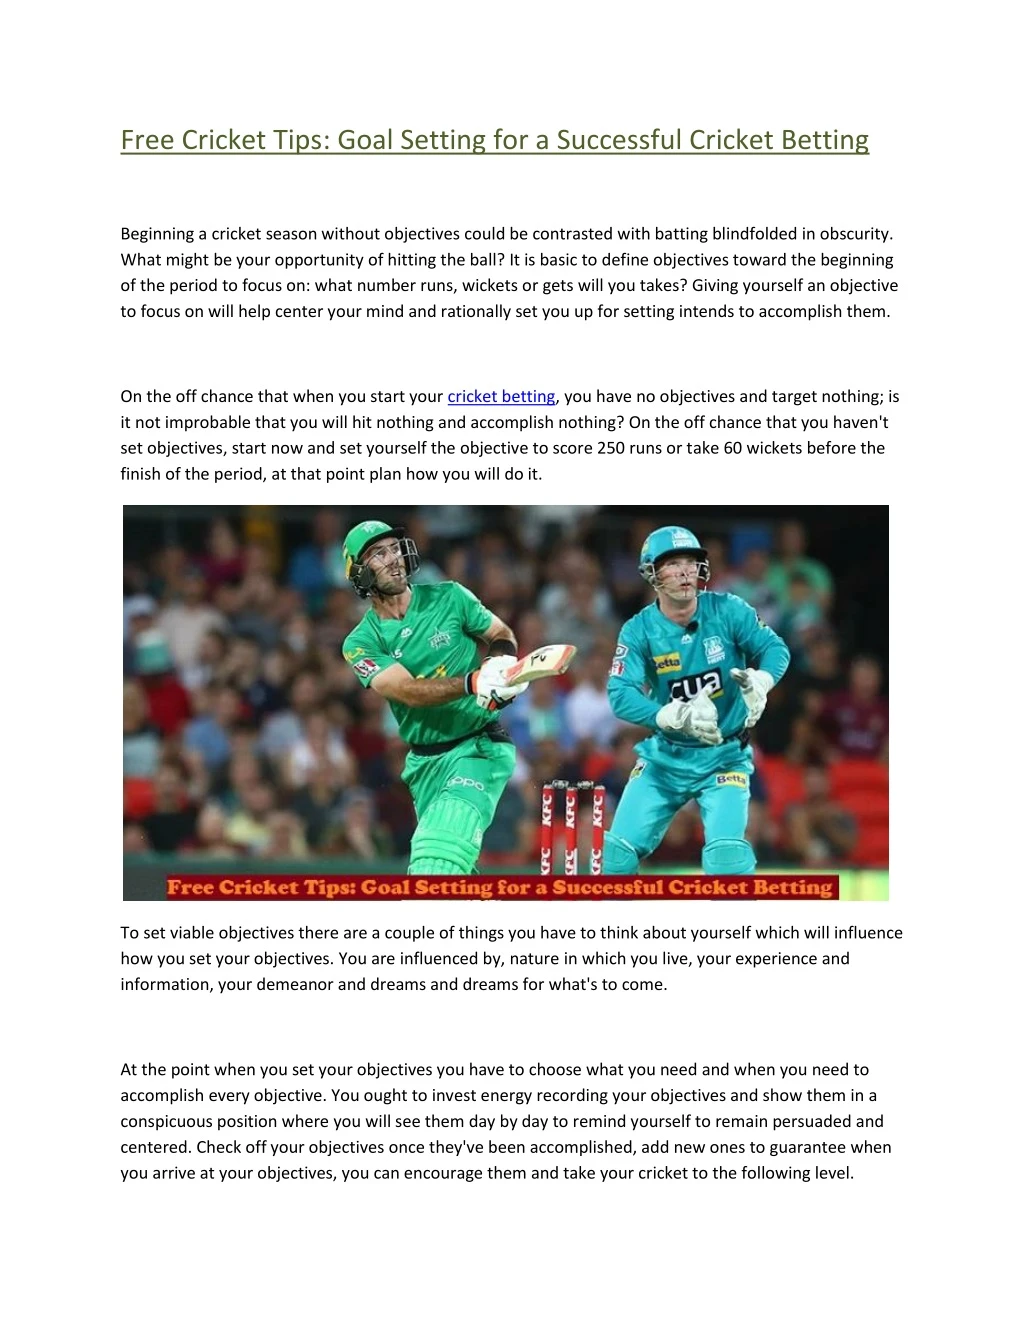 free cricket tips goal setting for a successful